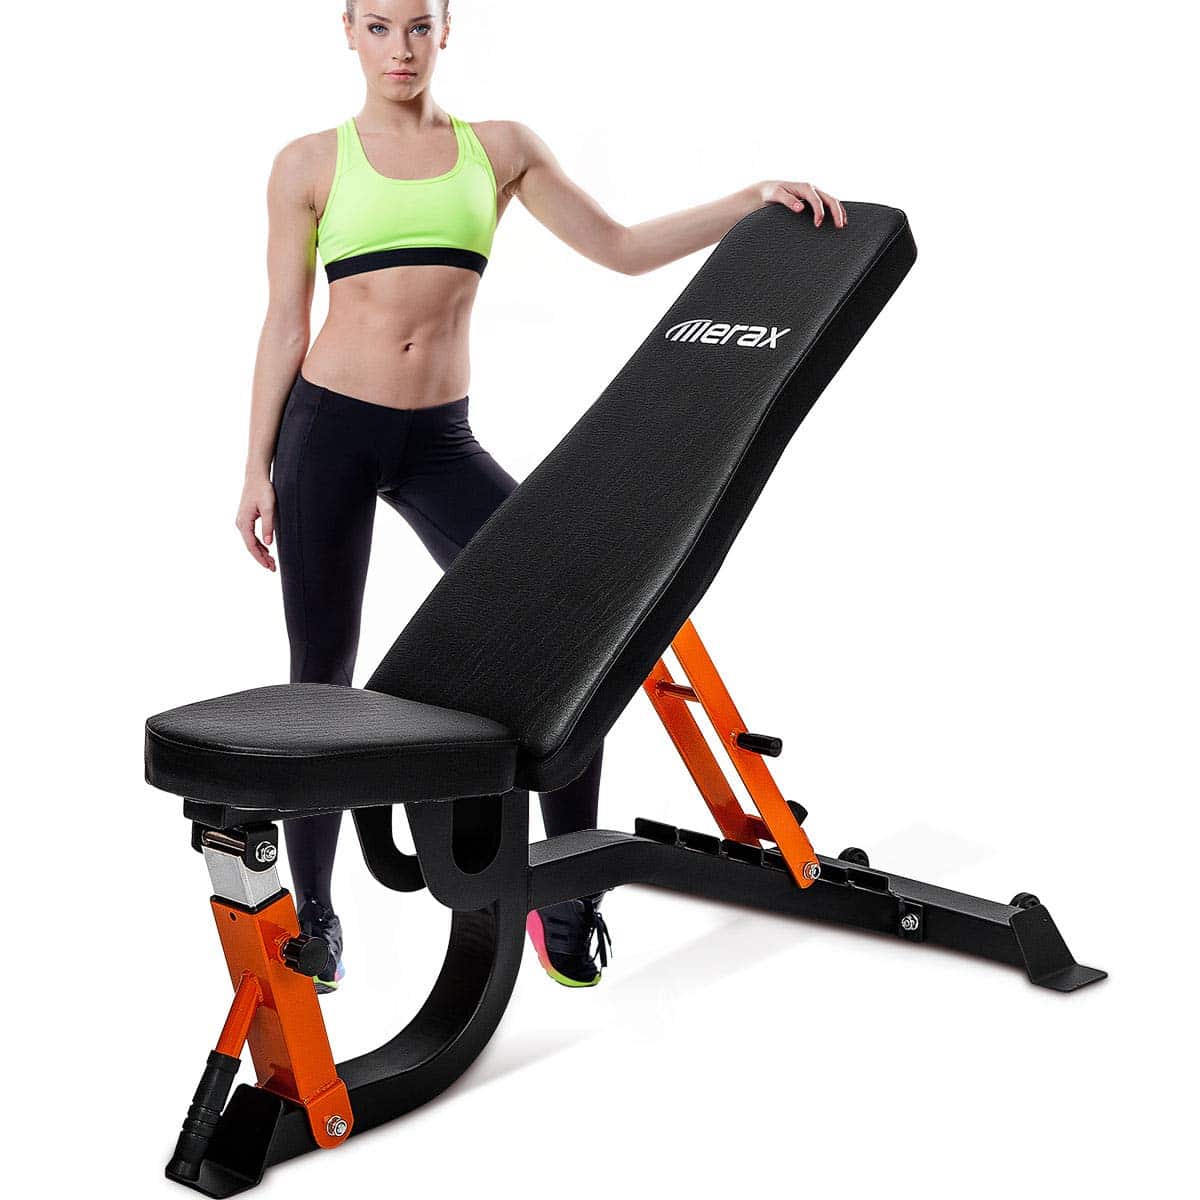  Linodi Adjustable Weight Bench Reviews for Build Muscle